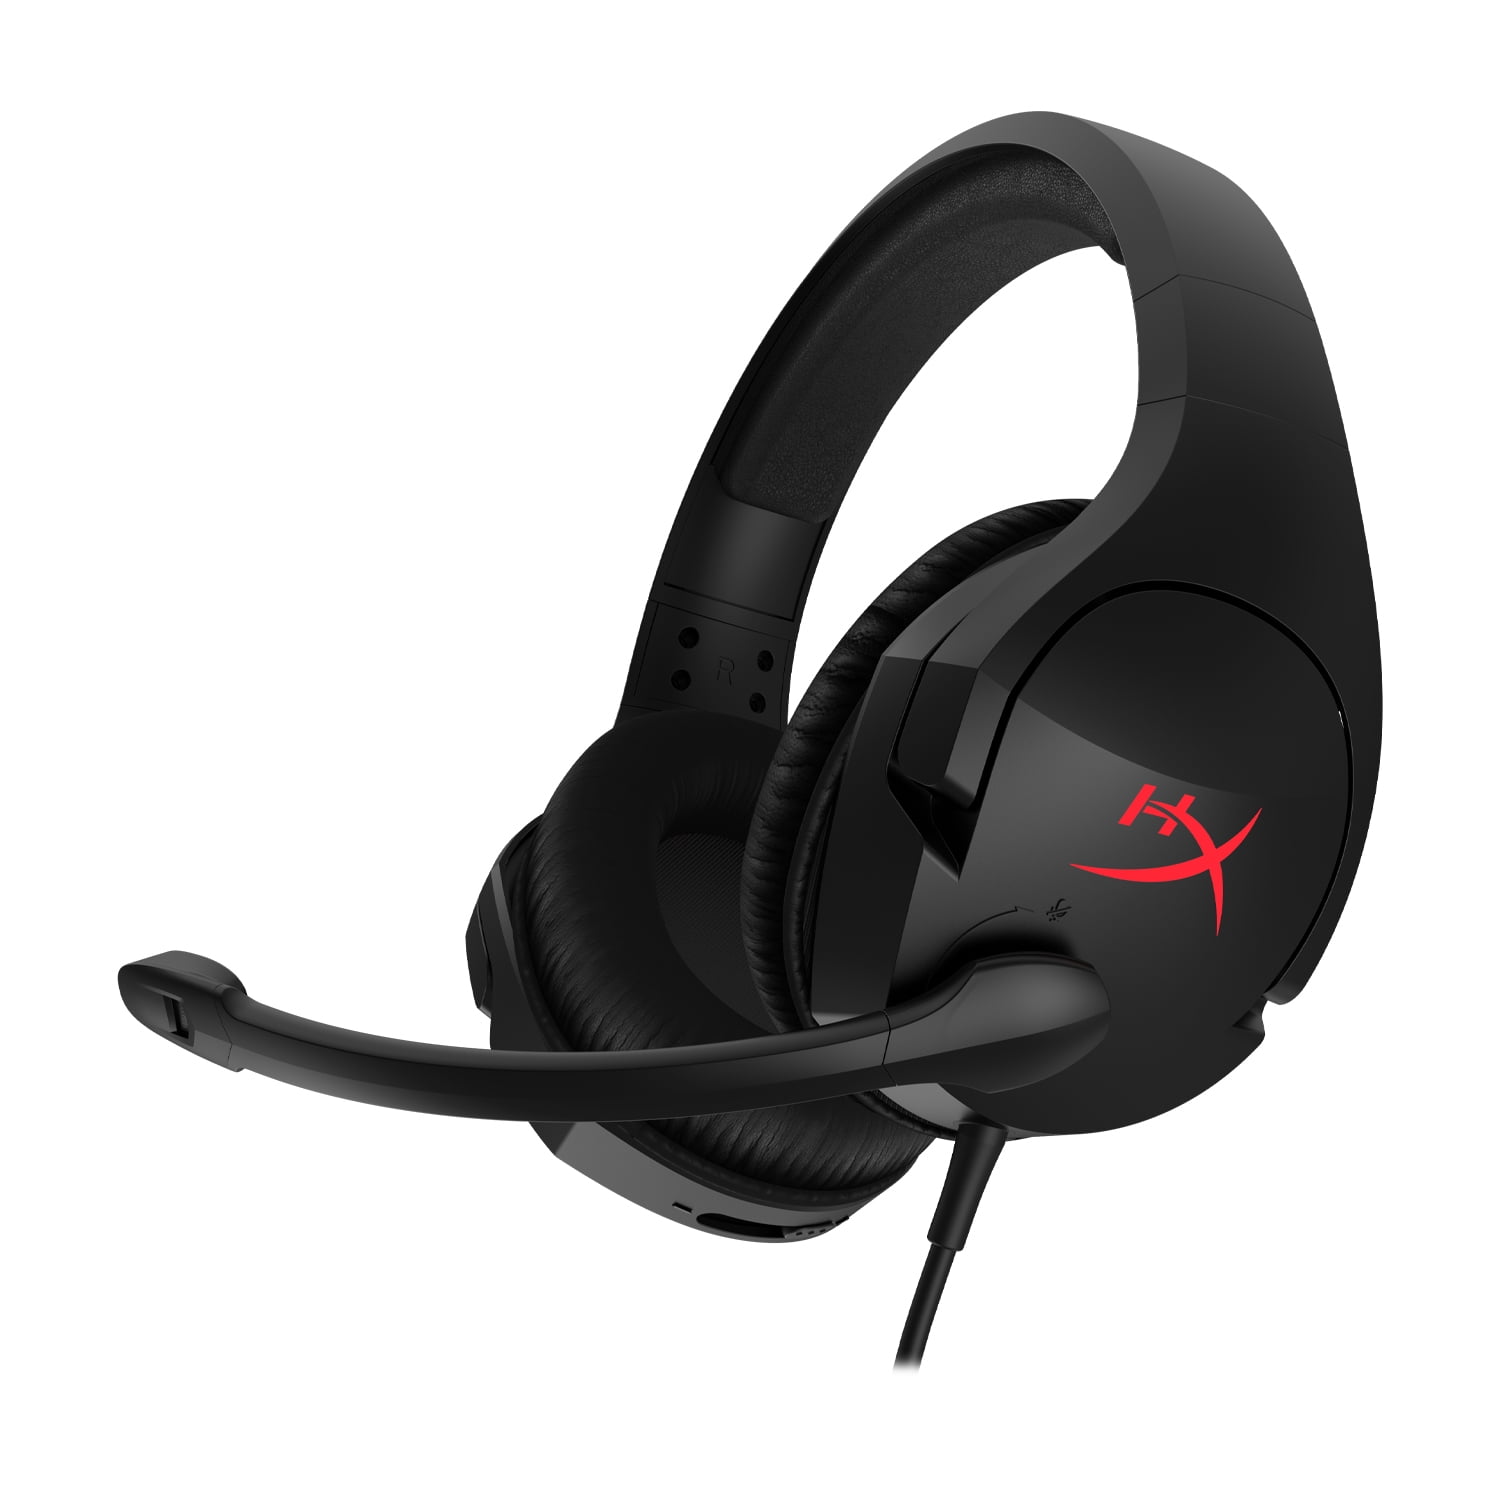 HyperX Cloud Stinger – Gaming Headset, Lightweight, Comfortable Memory Foam, 3.5mm connection, Noise-Cancellation Microphone, Works on PC, PS4, PS5, Xbox One, Xbox Series X|S, Nintendo Switch, Mobile